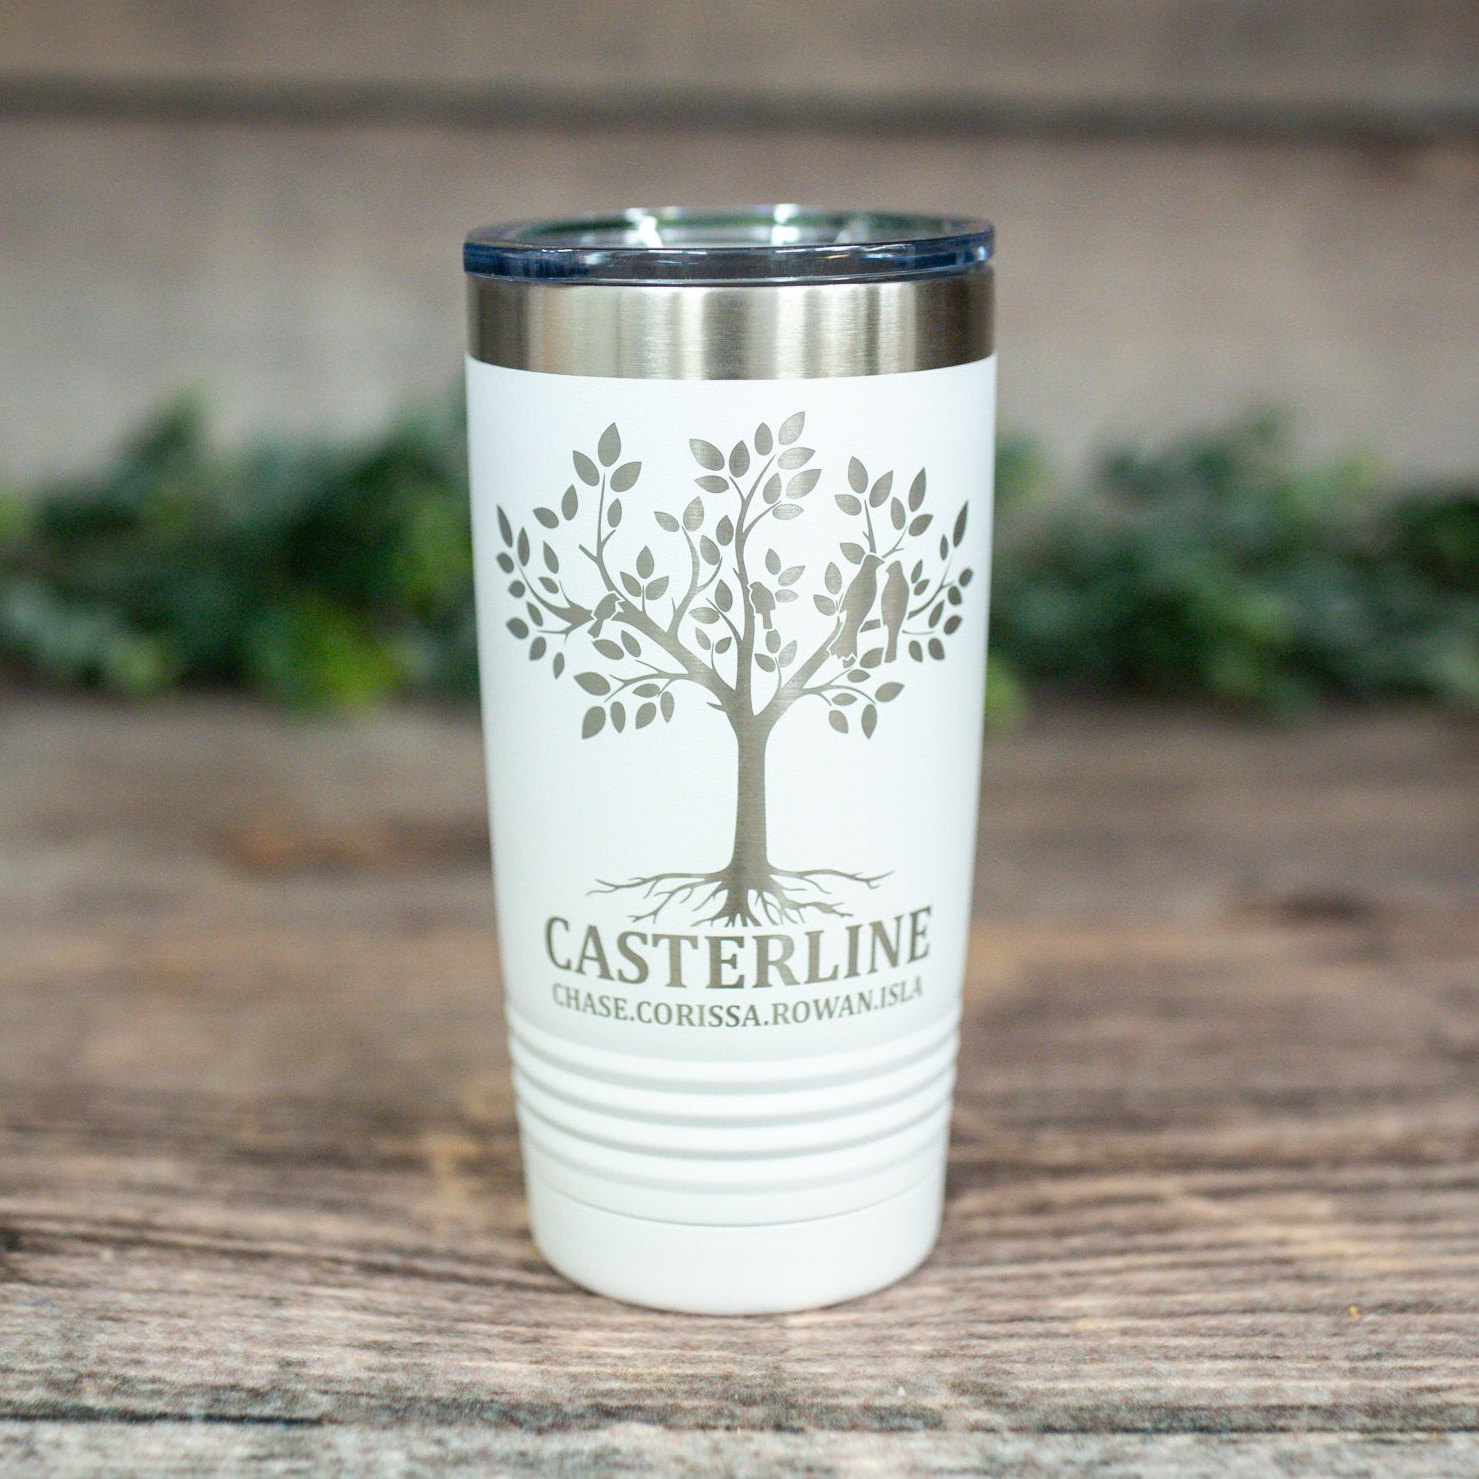 https://3cetching.com/wp-content/uploads/2021/07/family-tree-personalized-engraved-stainless-steel-tumbler-family-reunion-gift-cute-family-travel-mug-60f73de6.jpg